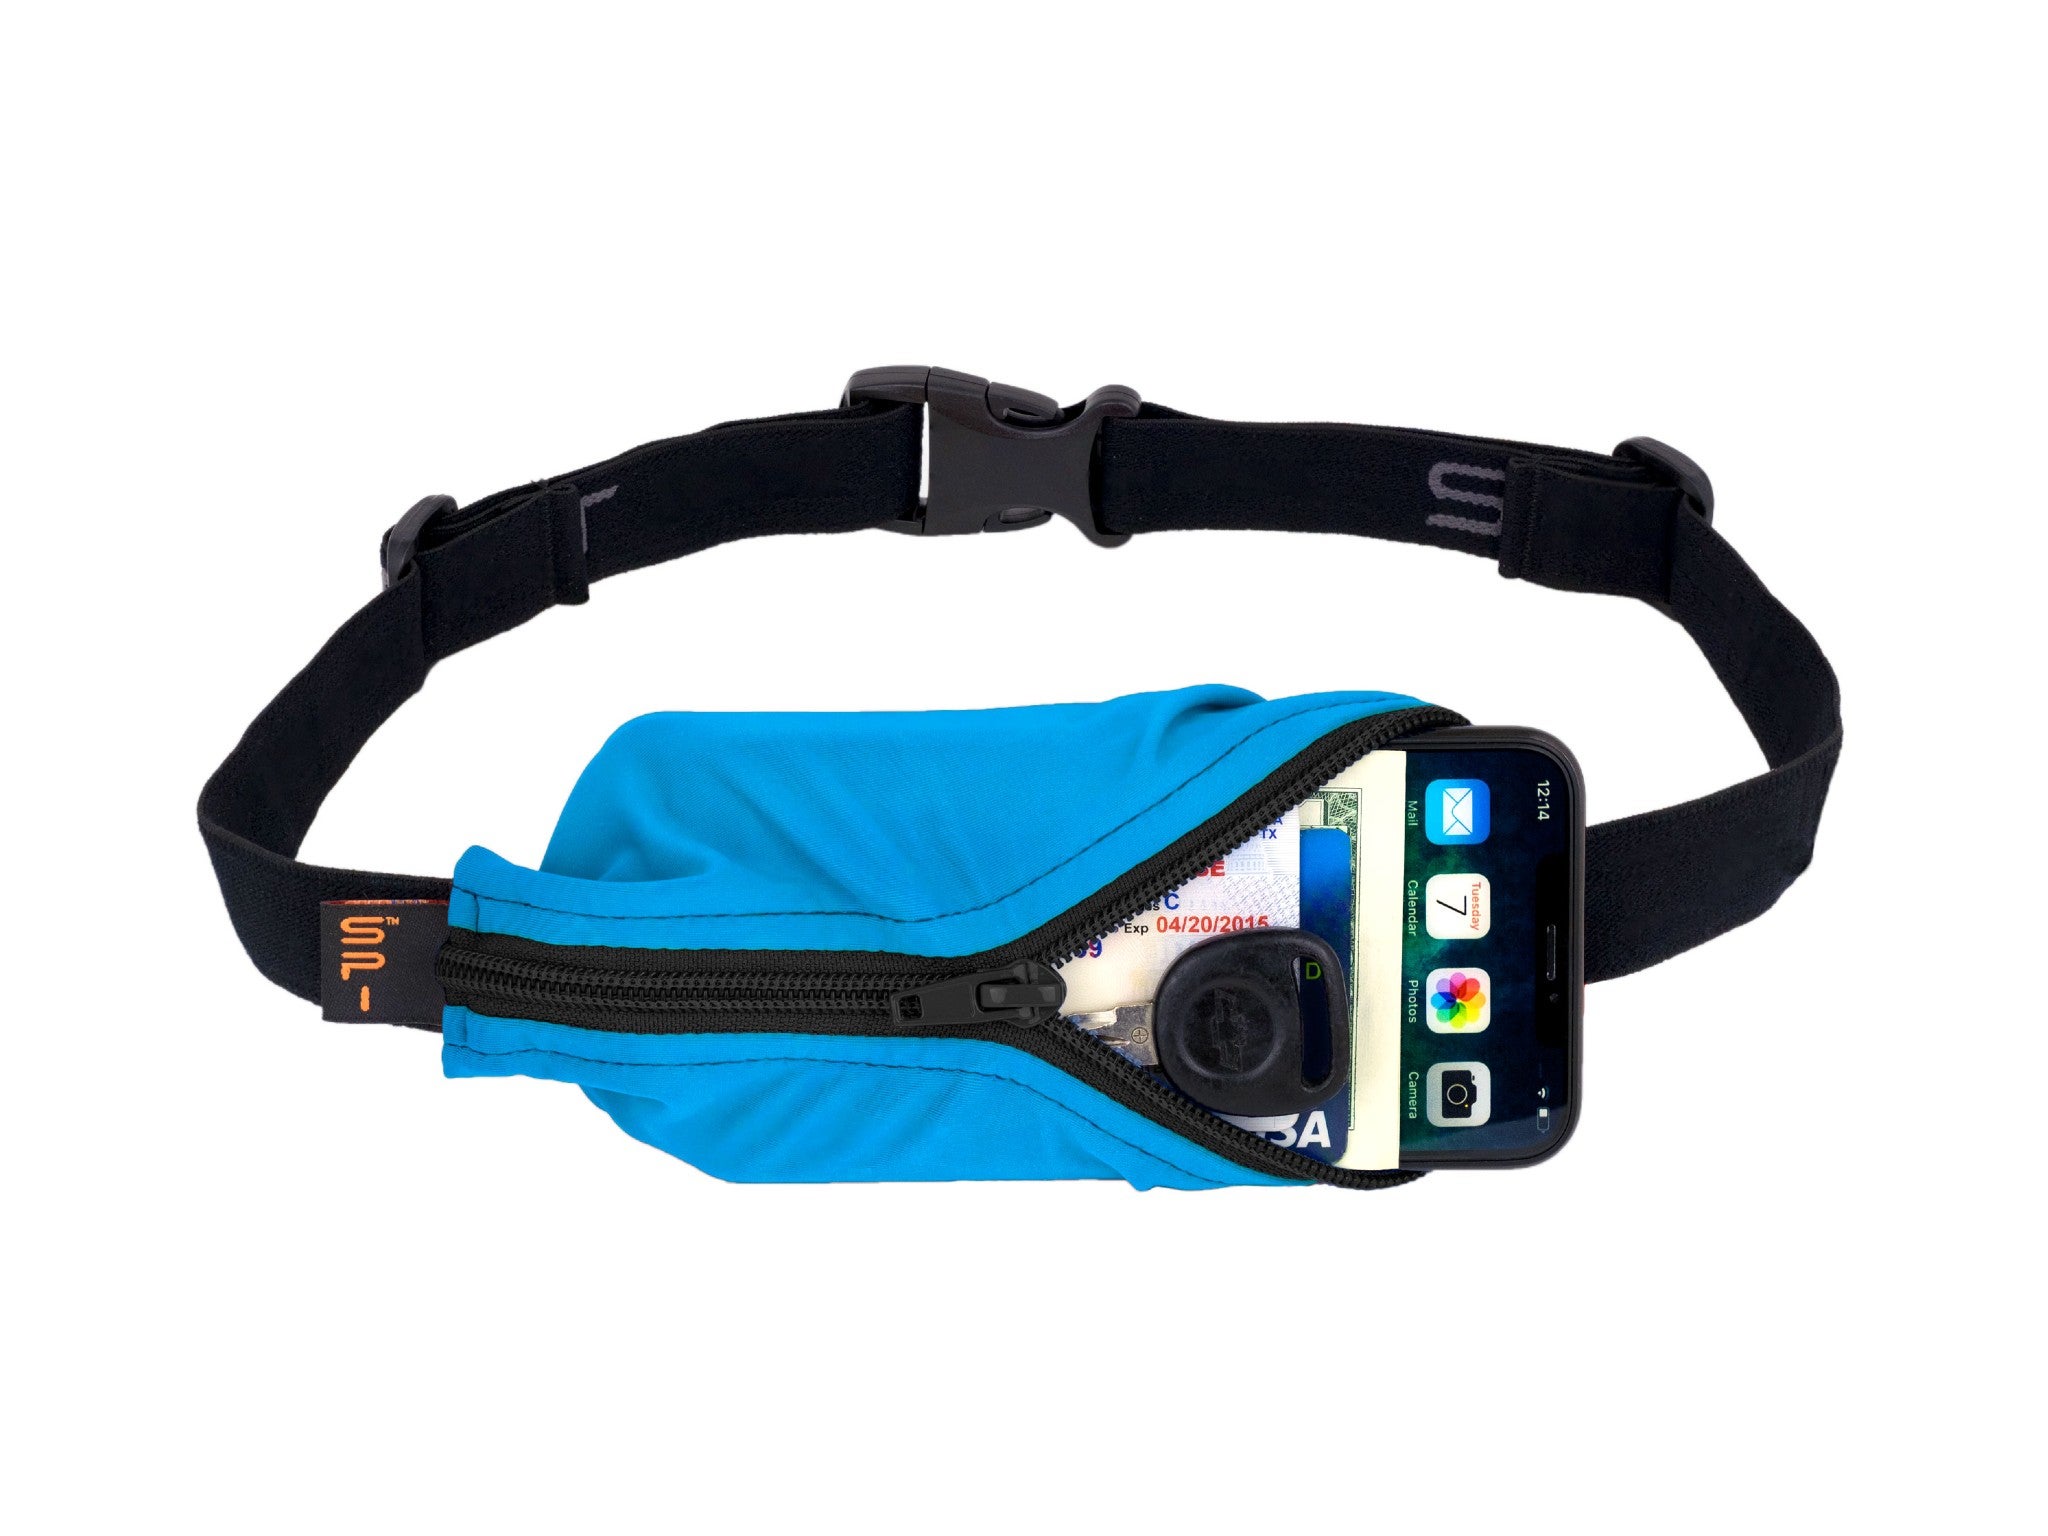 Cycling Spy Sports,Travel Phone Cards Money Hiking Etc GothicBride Running Belt Waterproof Pocket Belt Waist Pack Pouch with 2 Expandable Pockets for 6.5 inches iPhone XR XS MAX 8 Plus